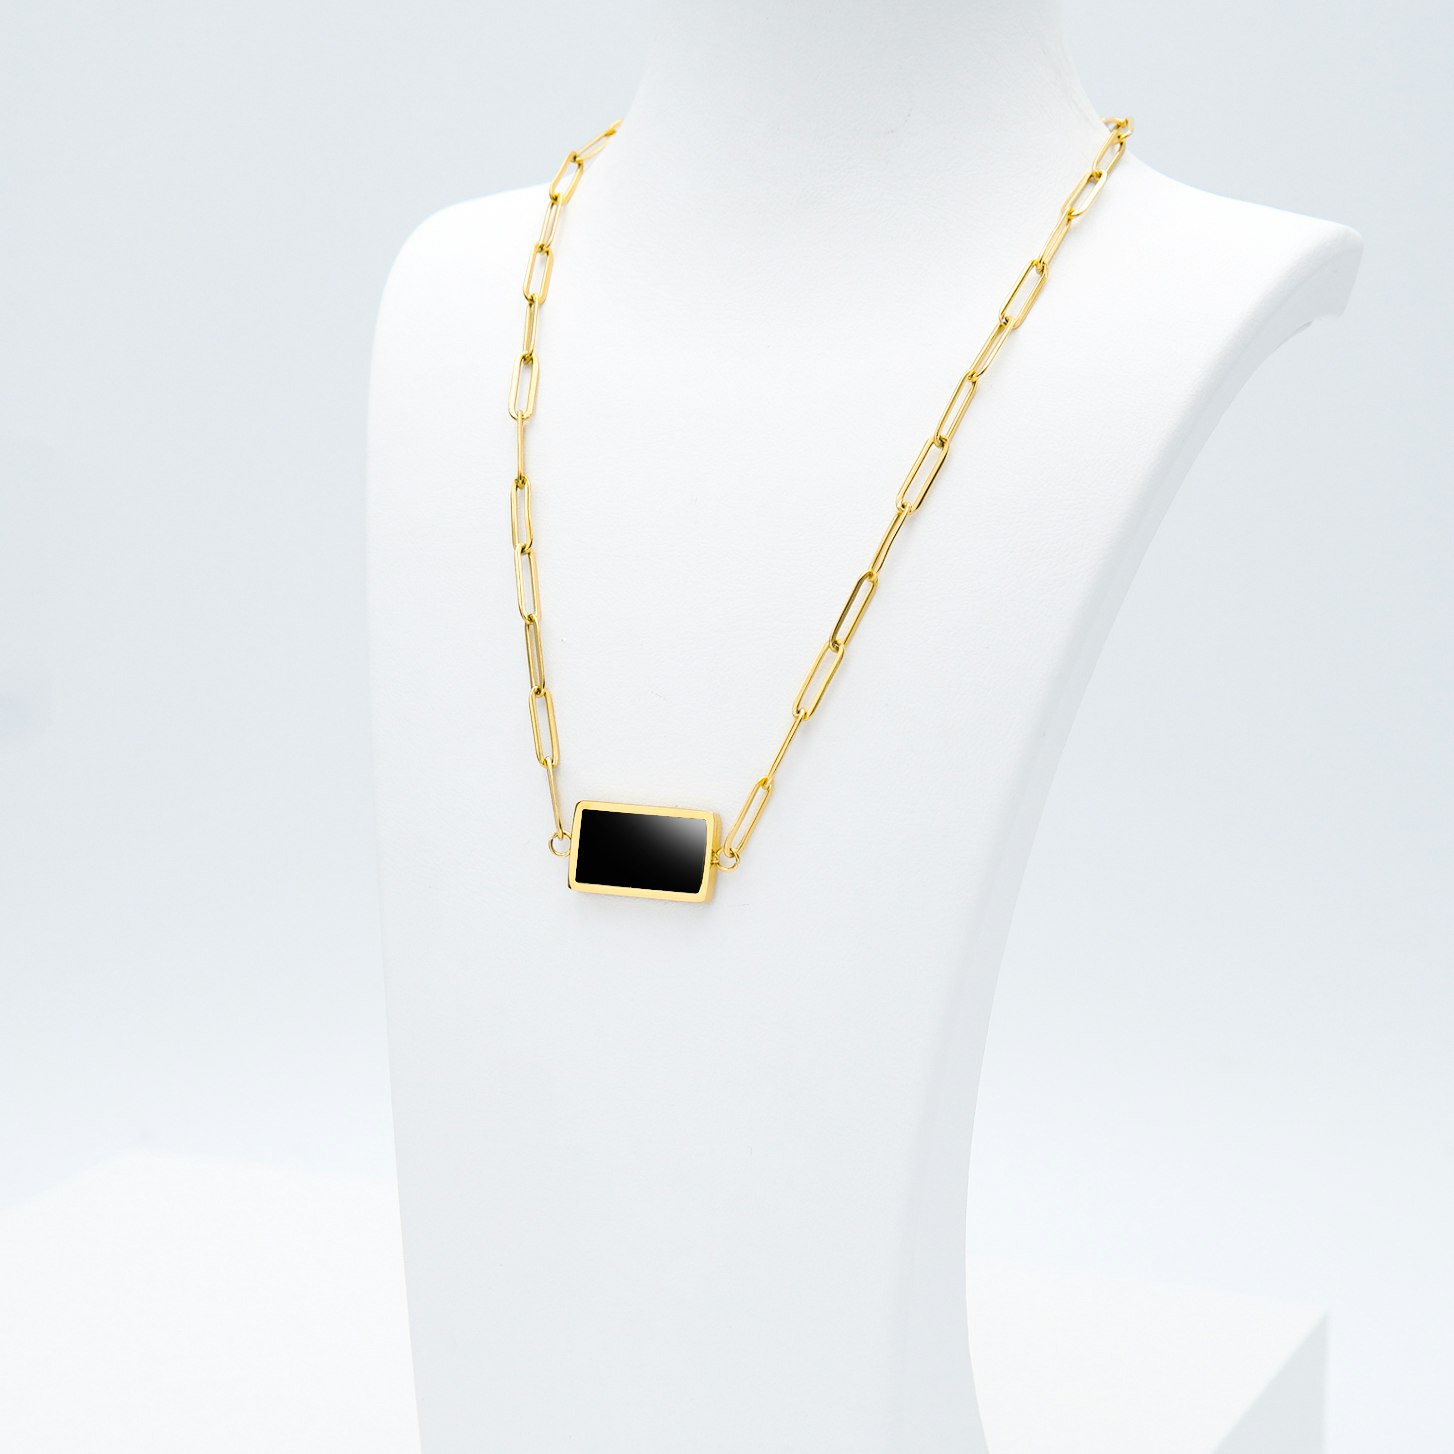 1- Gold in night Gold Edition Halsband Modern and trendy Necklace and women jewelry and accessories from SWEVALI fashion Sweden